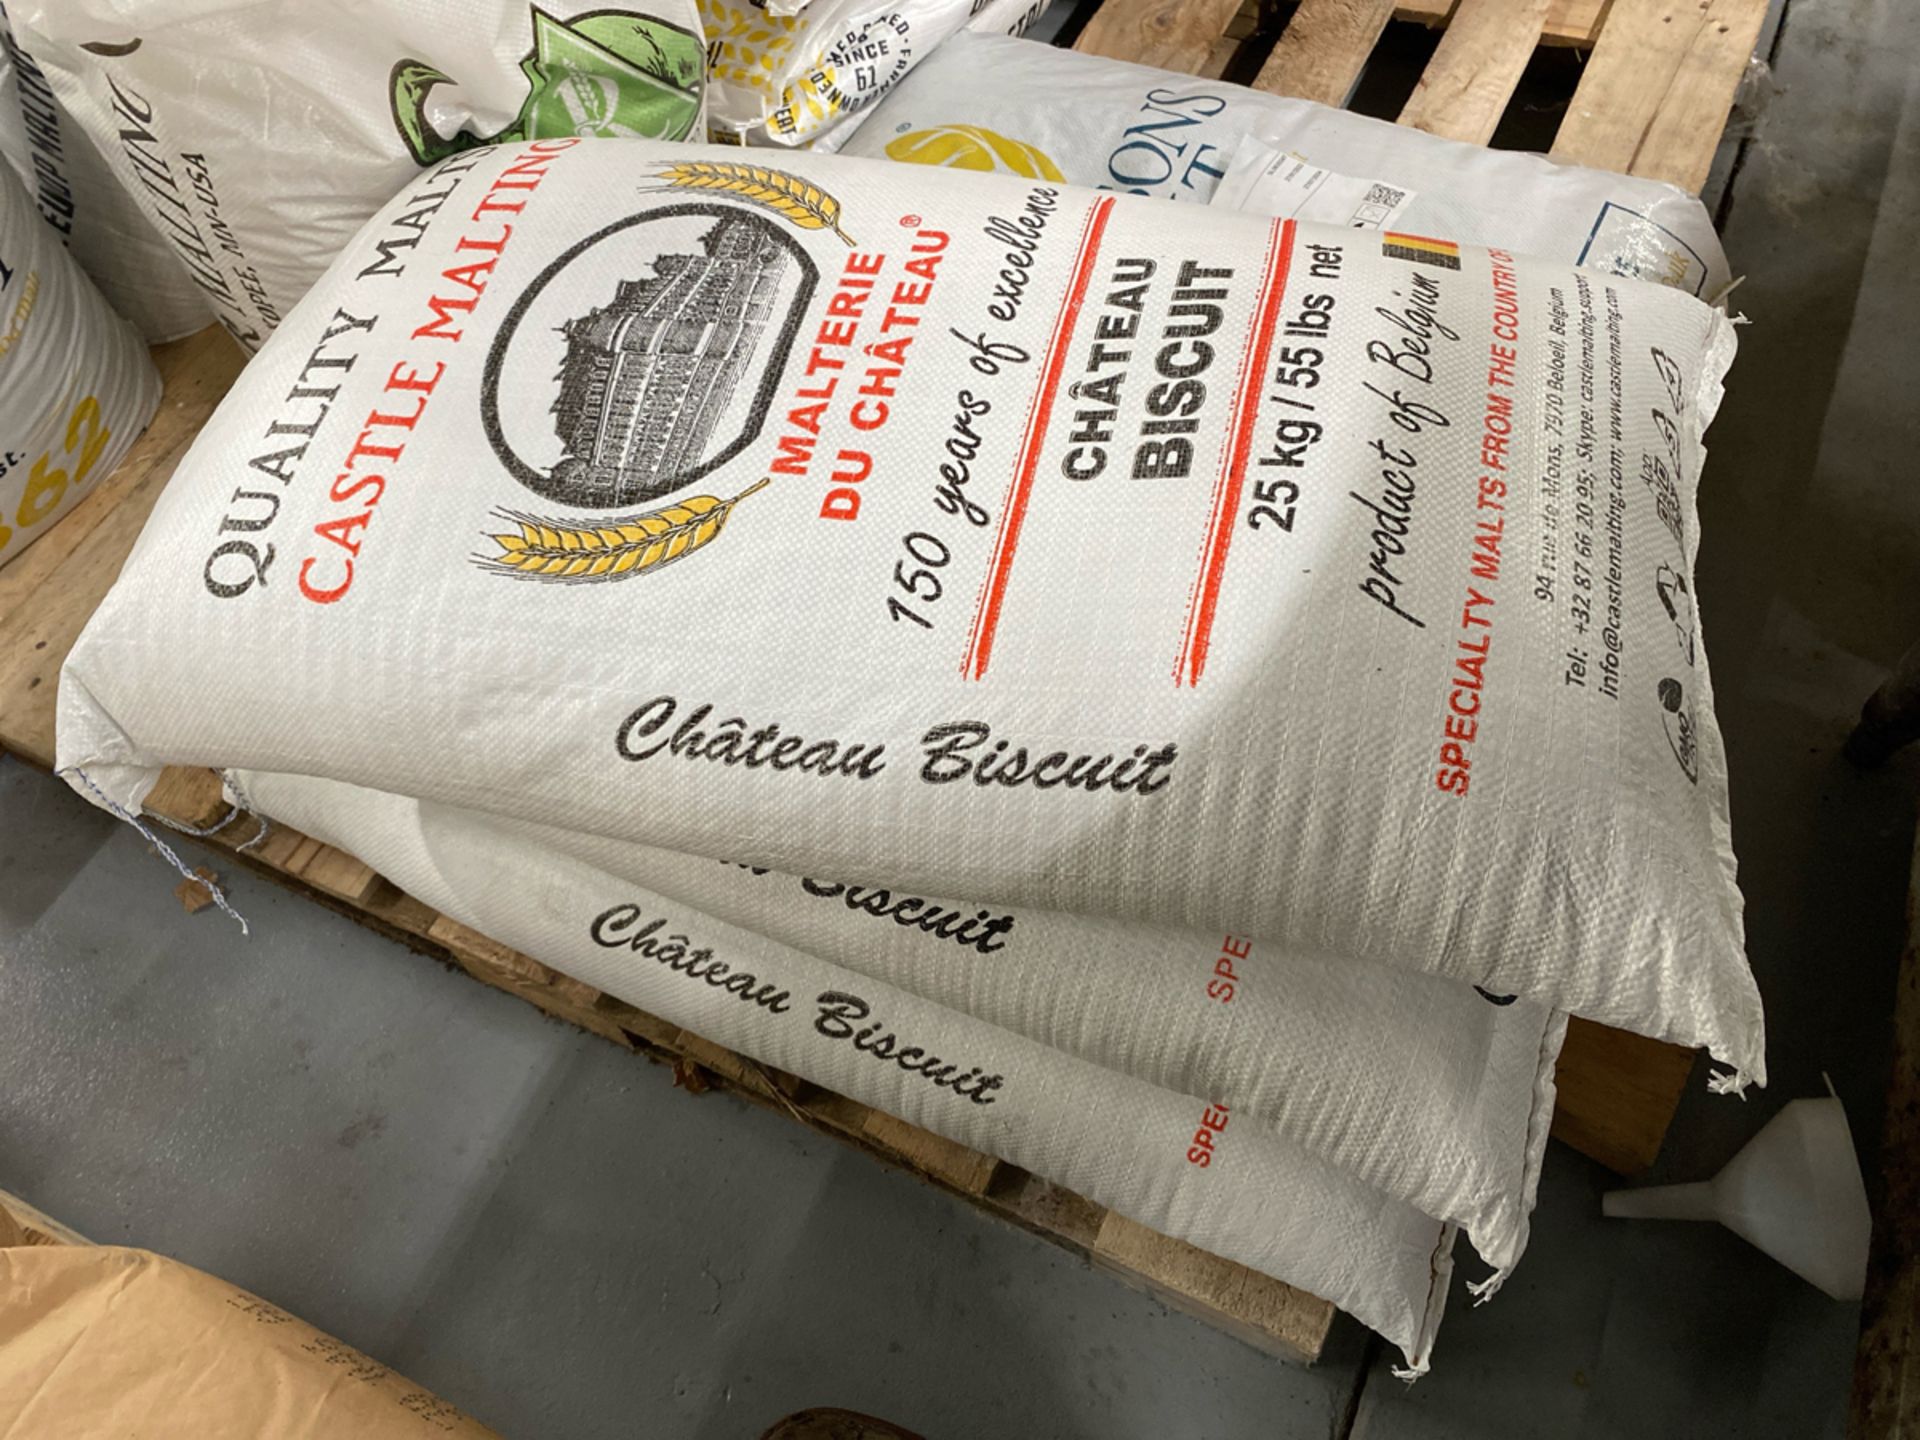 [each] 55 lb. Bags of Castle Malting Chateau Biscuit - Image 2 of 3